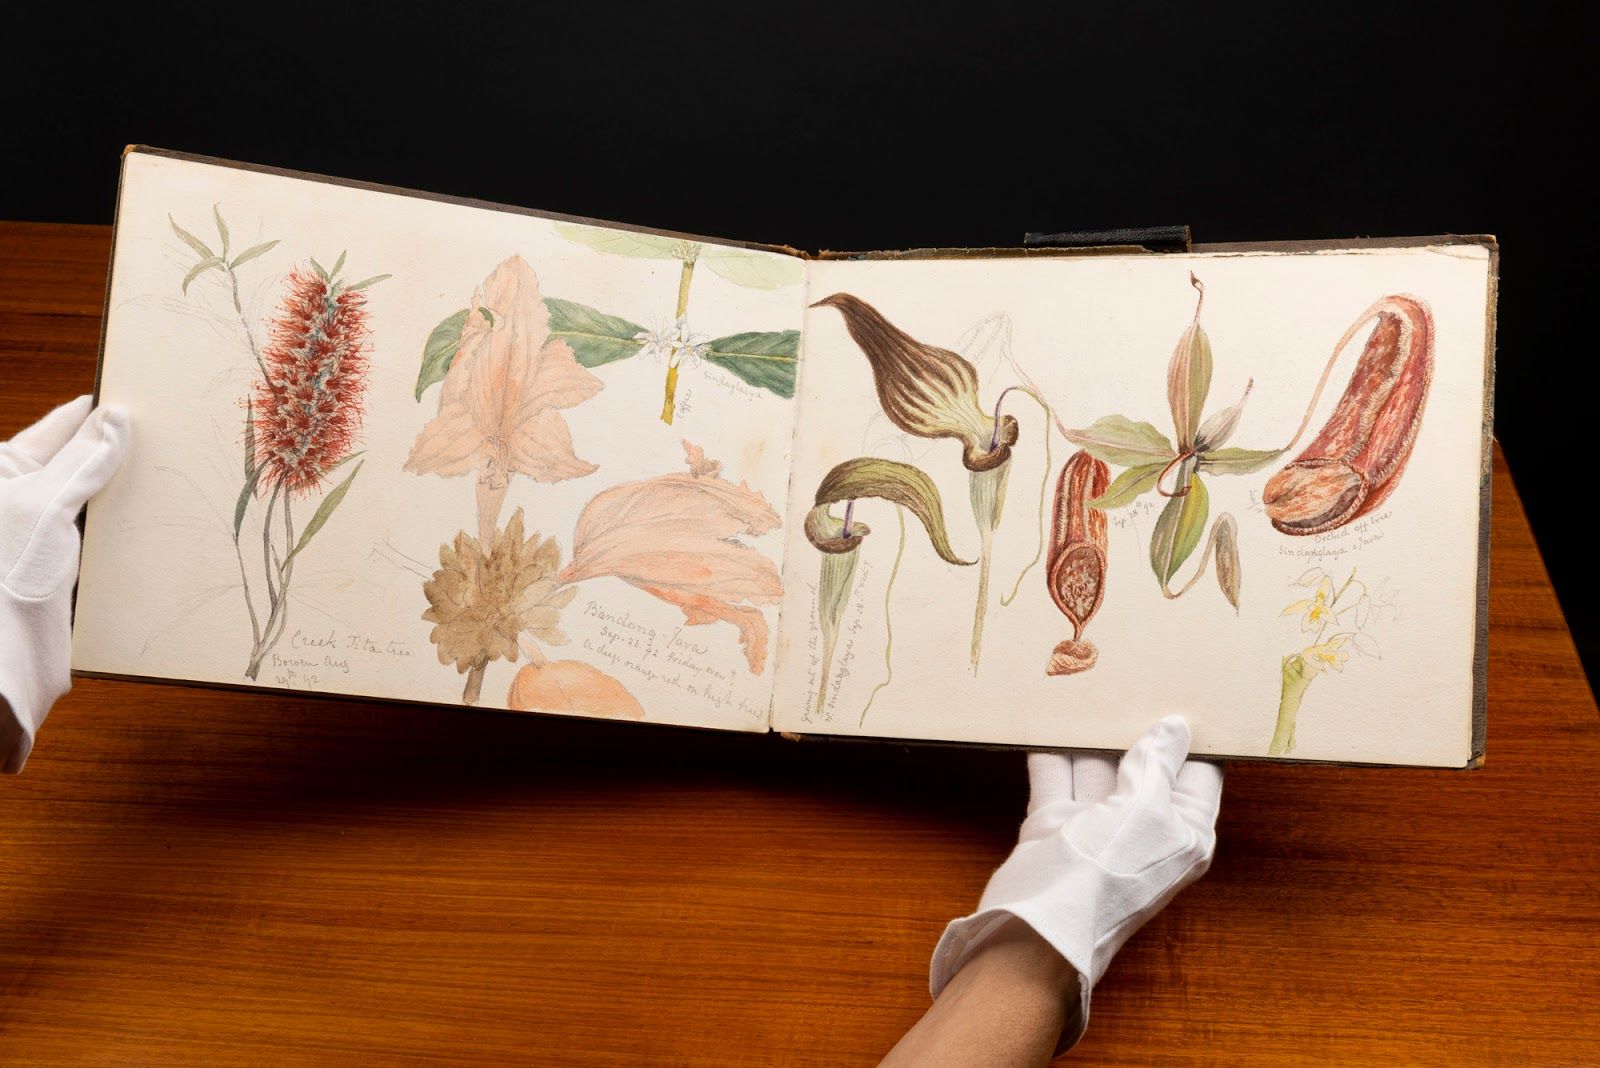 Exploring the Artistic Treasures: Unveiling the 19th Century Sketchbook